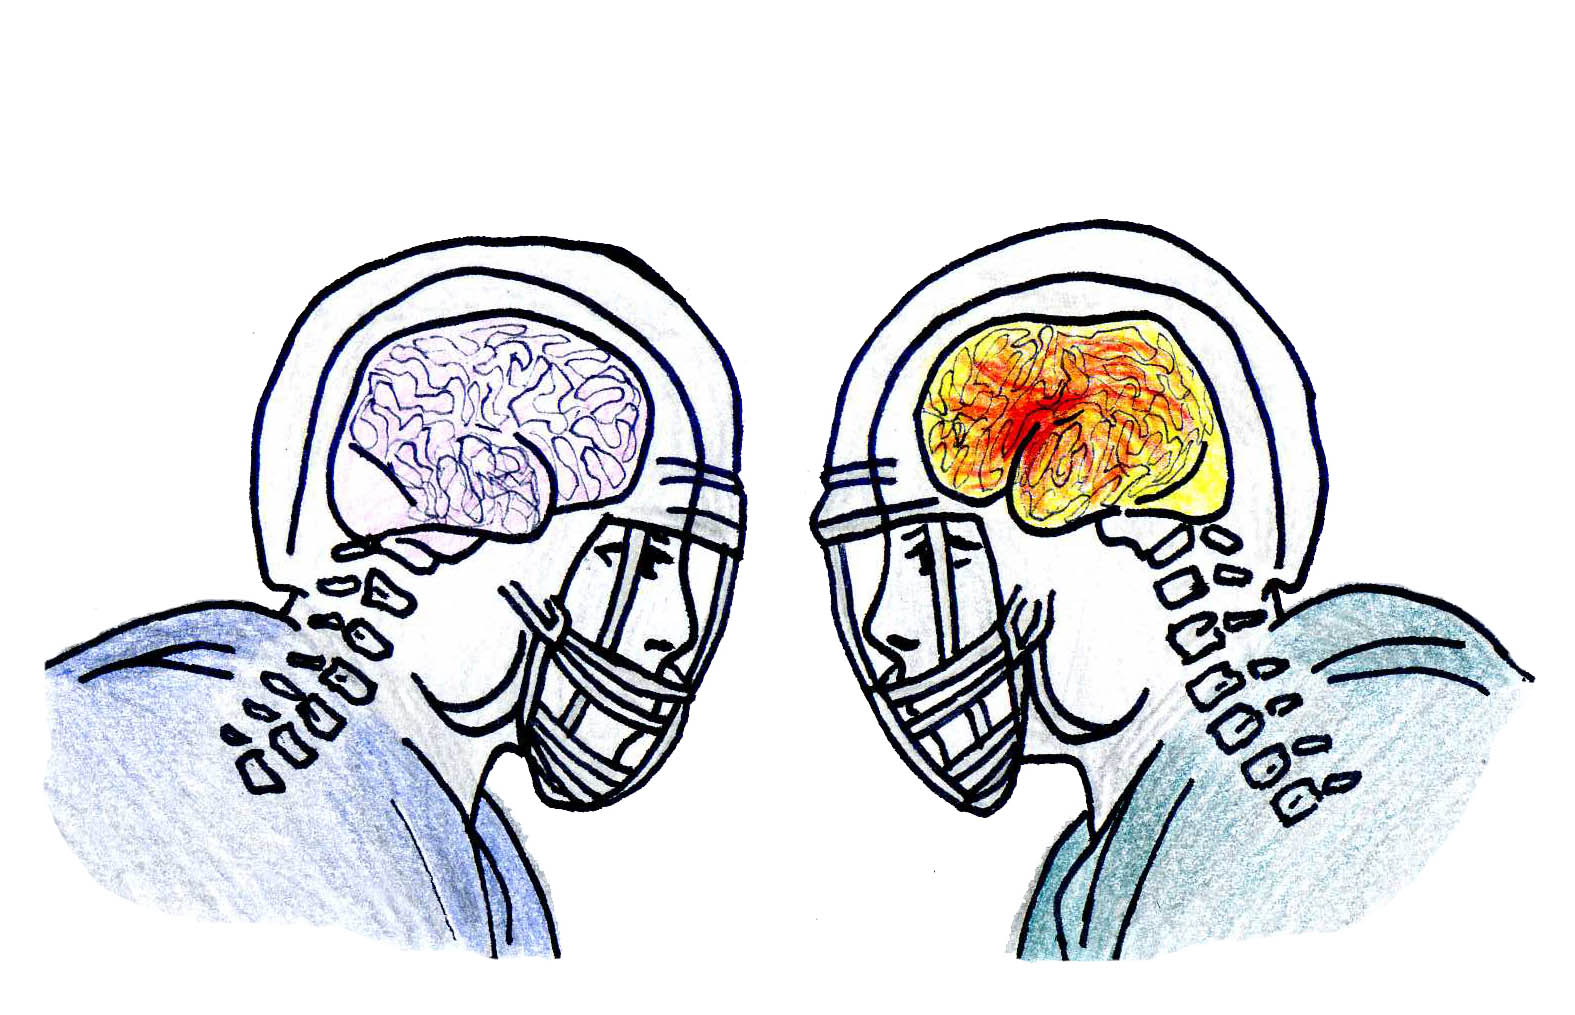 Concussions prove to be detrimental